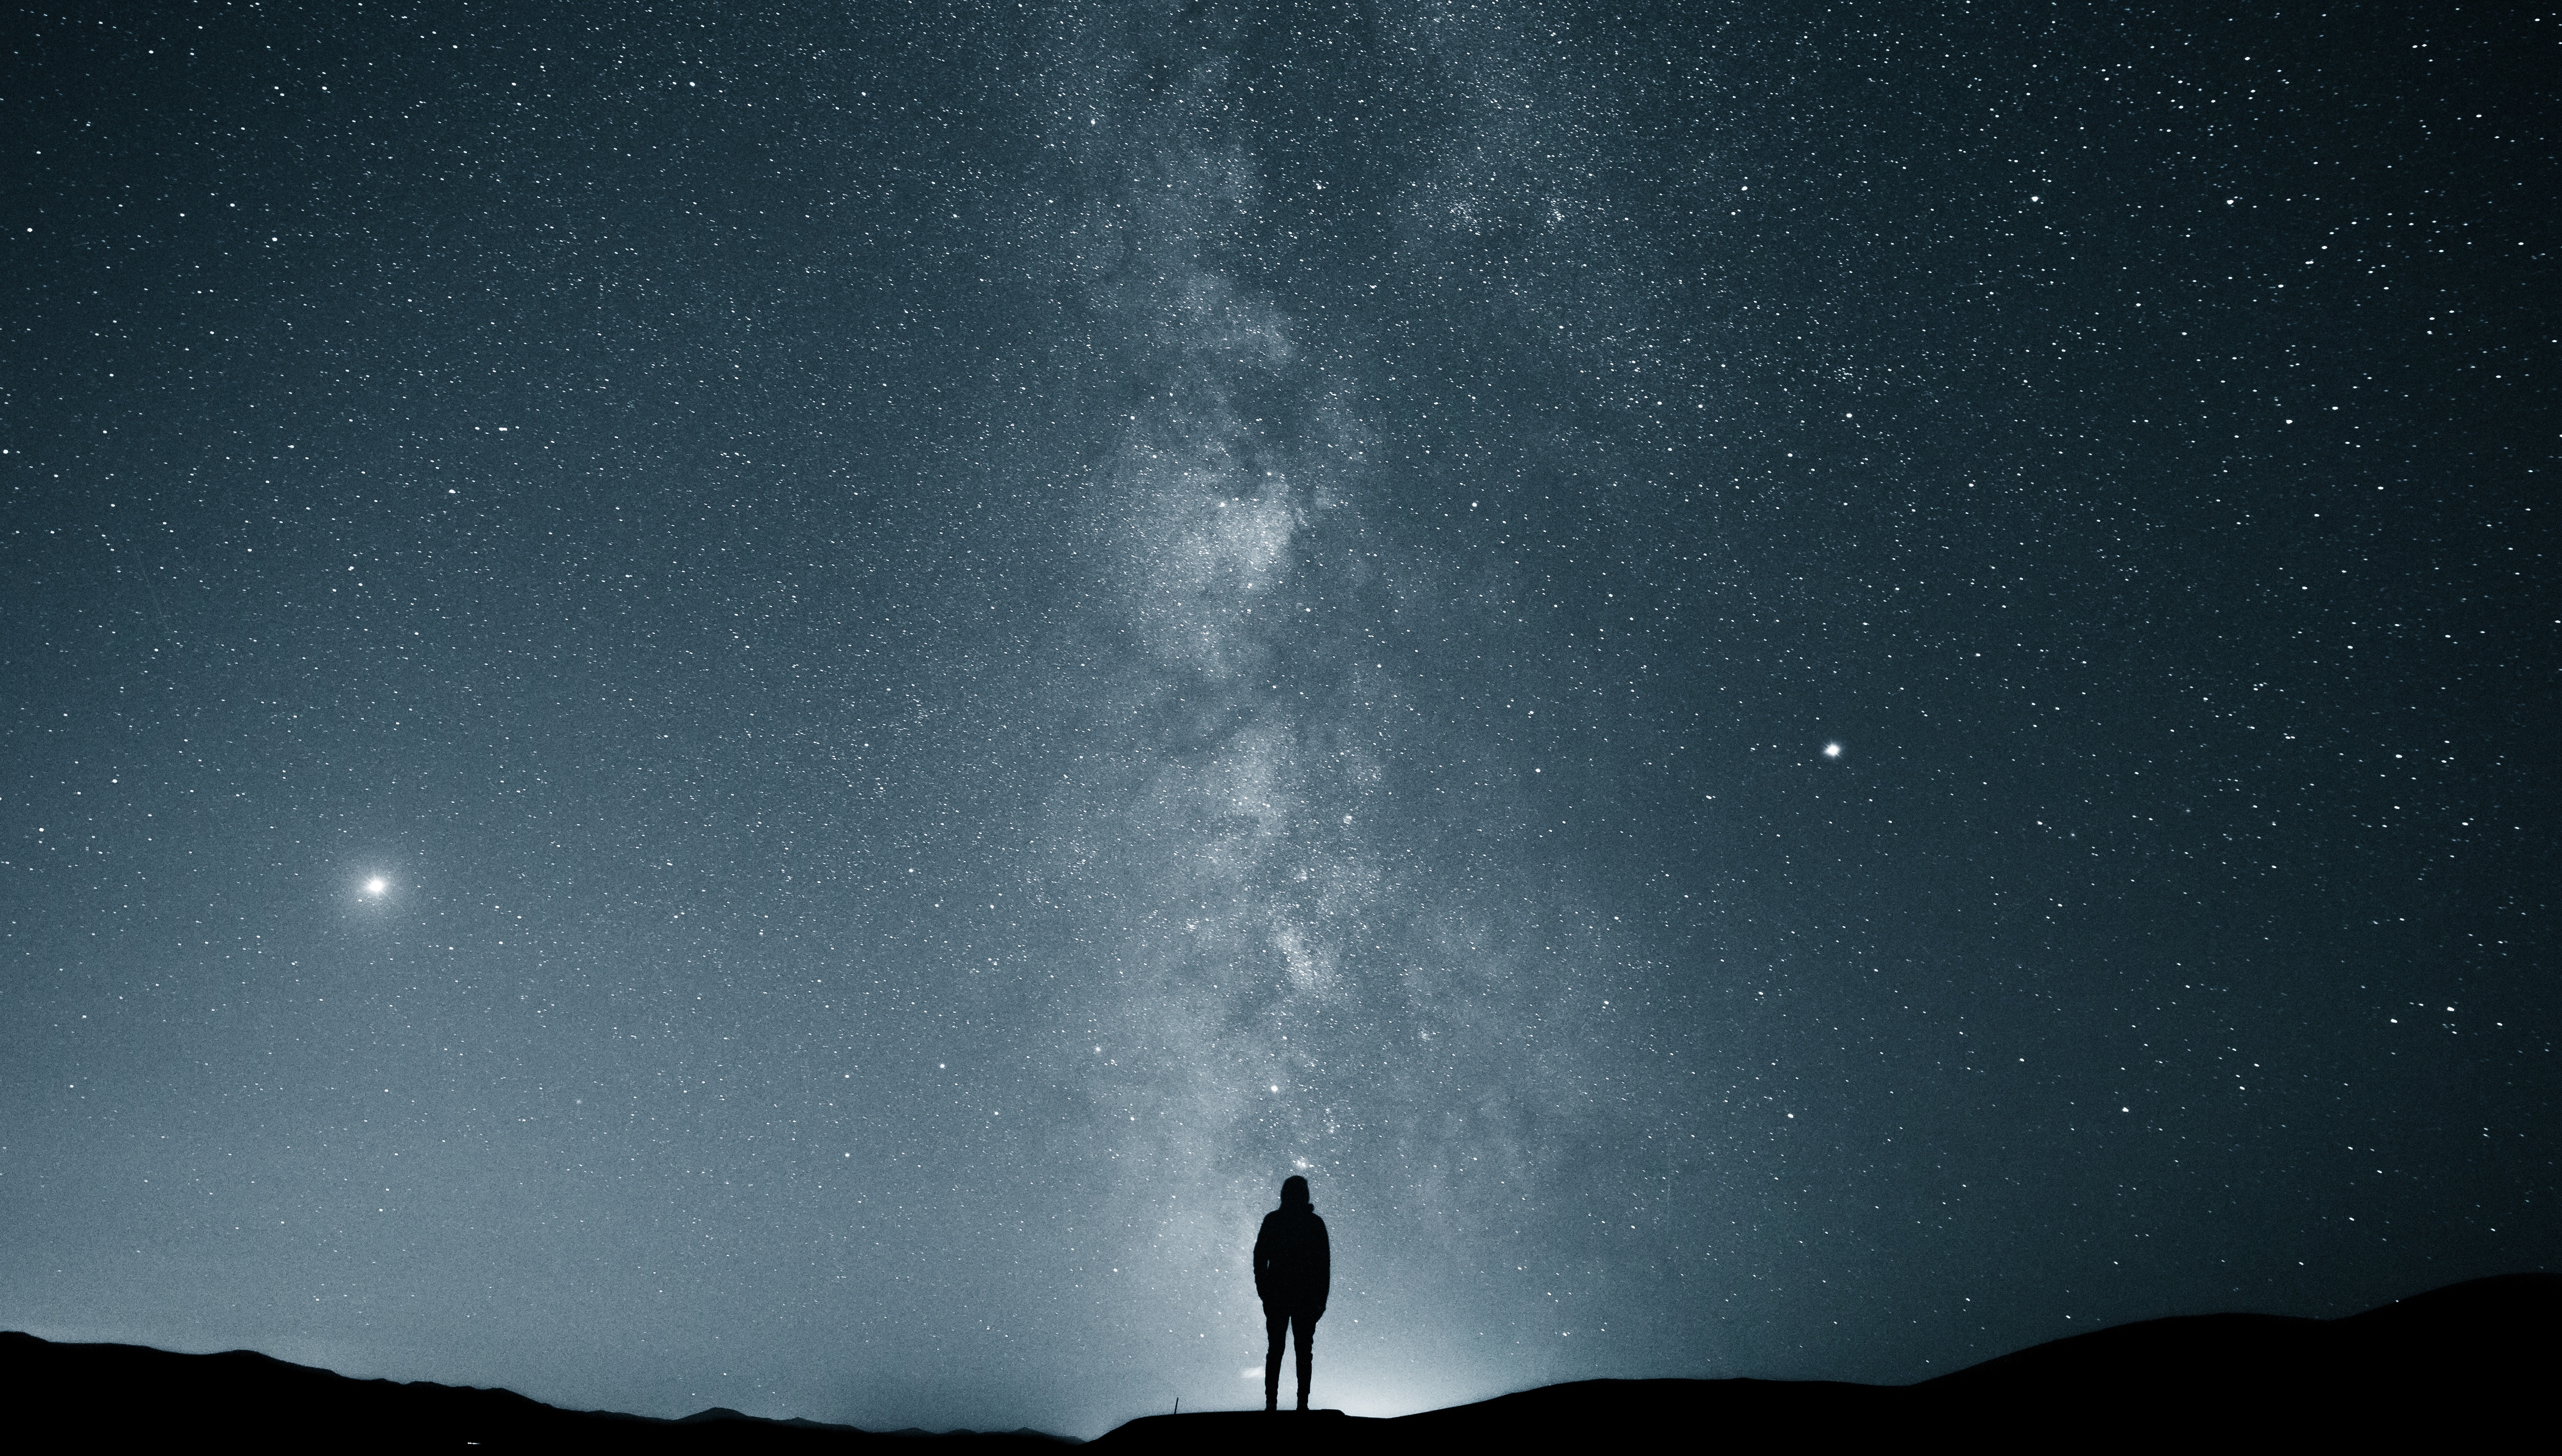 Free HD loneliness, privacy, dark, starry sky, shine, silhouette, seclusion, brilliance